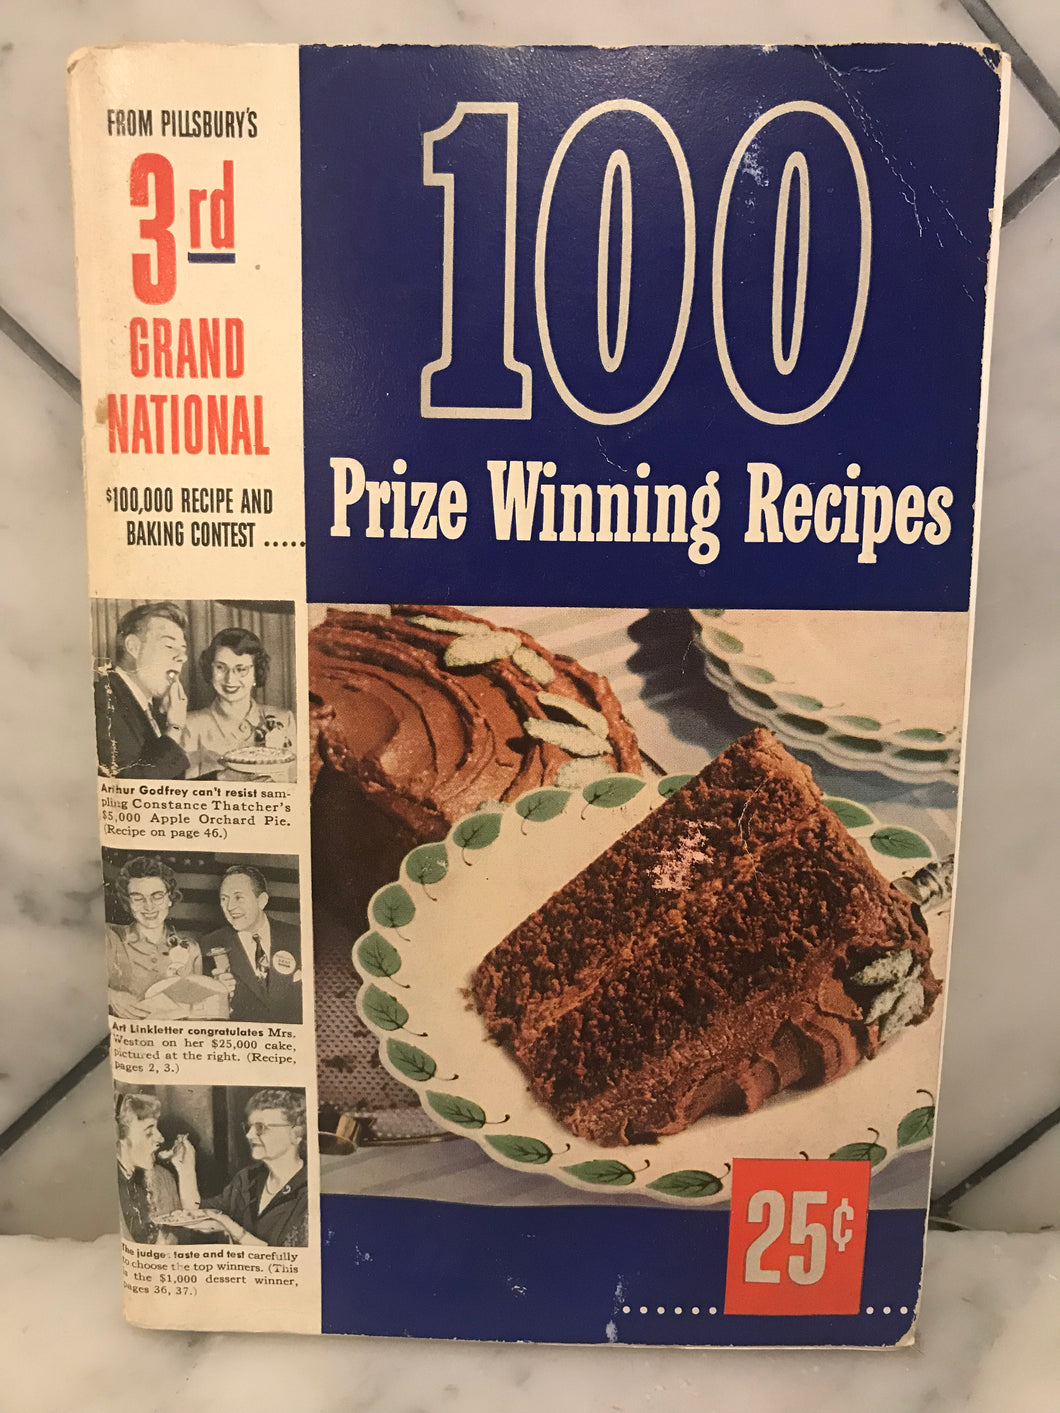 From Pillsbury's 3rd Grand National $100,000 Recipe and Baking Contest...100 Prize Winning Recipes